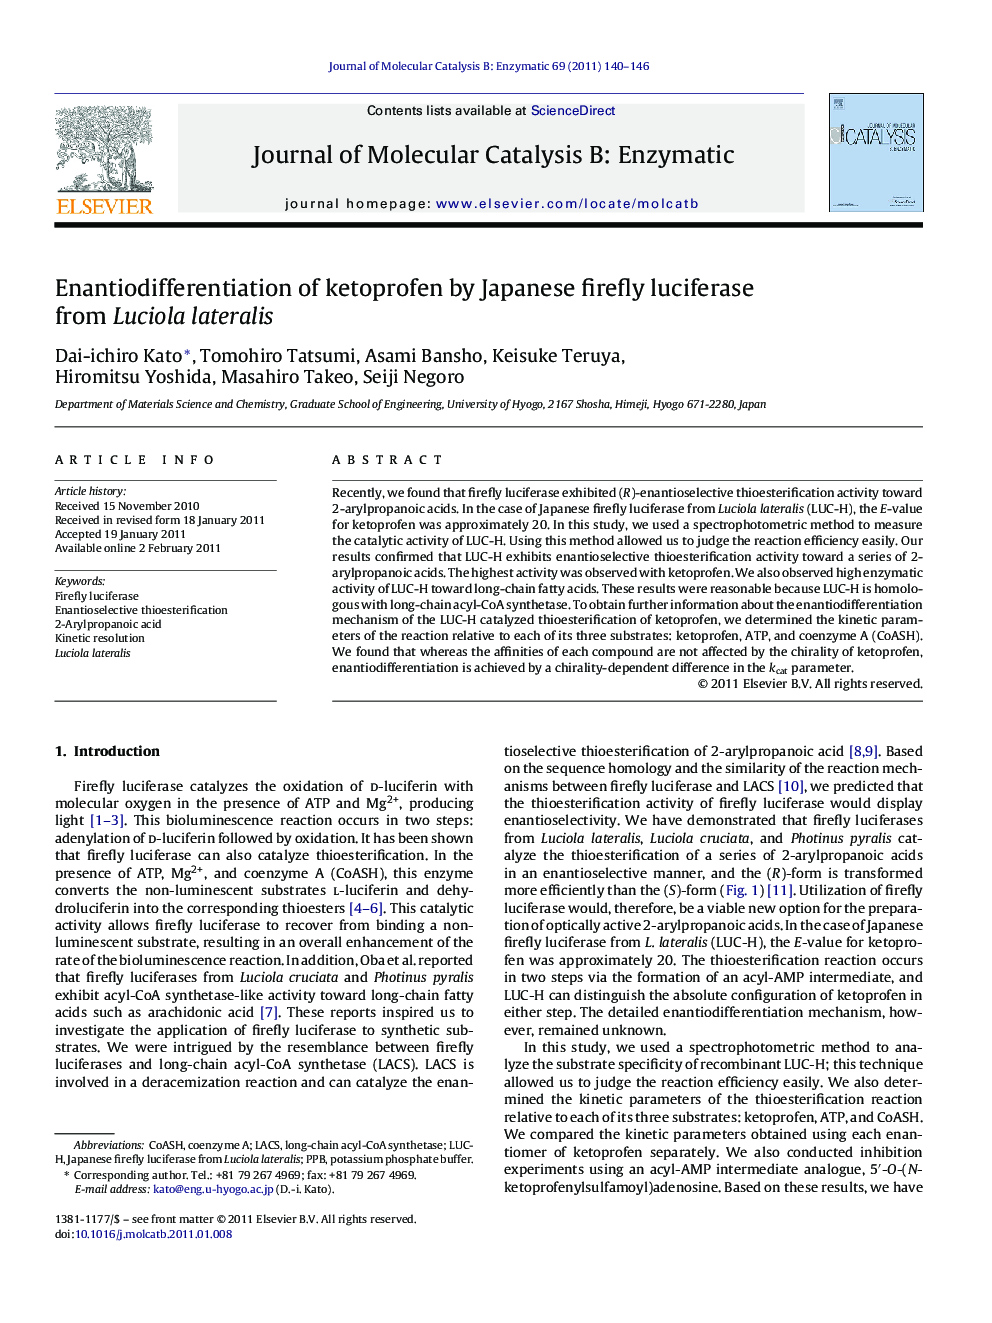 Enantiodifferentiation of ketoprofen by Japanese firefly luciferase from Luciola lateralis